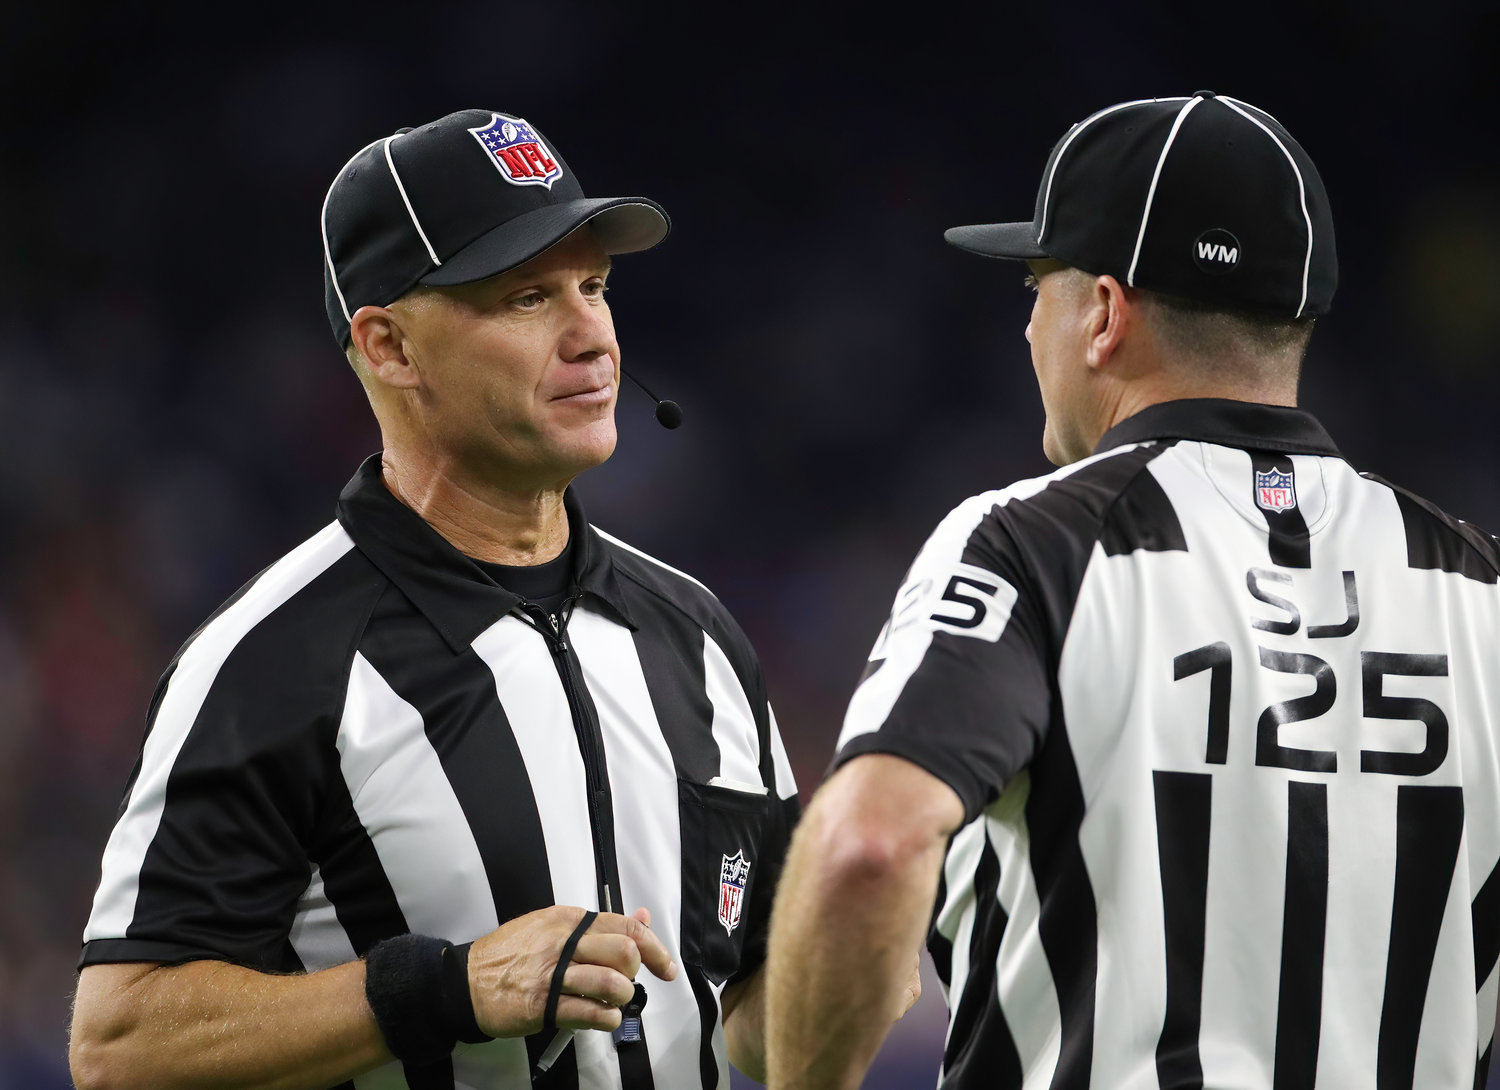 Back judge Rich Martinez (39) talks with side judge Chad Hill (125) during an NFL preseason game between the Texans and the 49ers in Houston, Texas, on August 25, 2022.